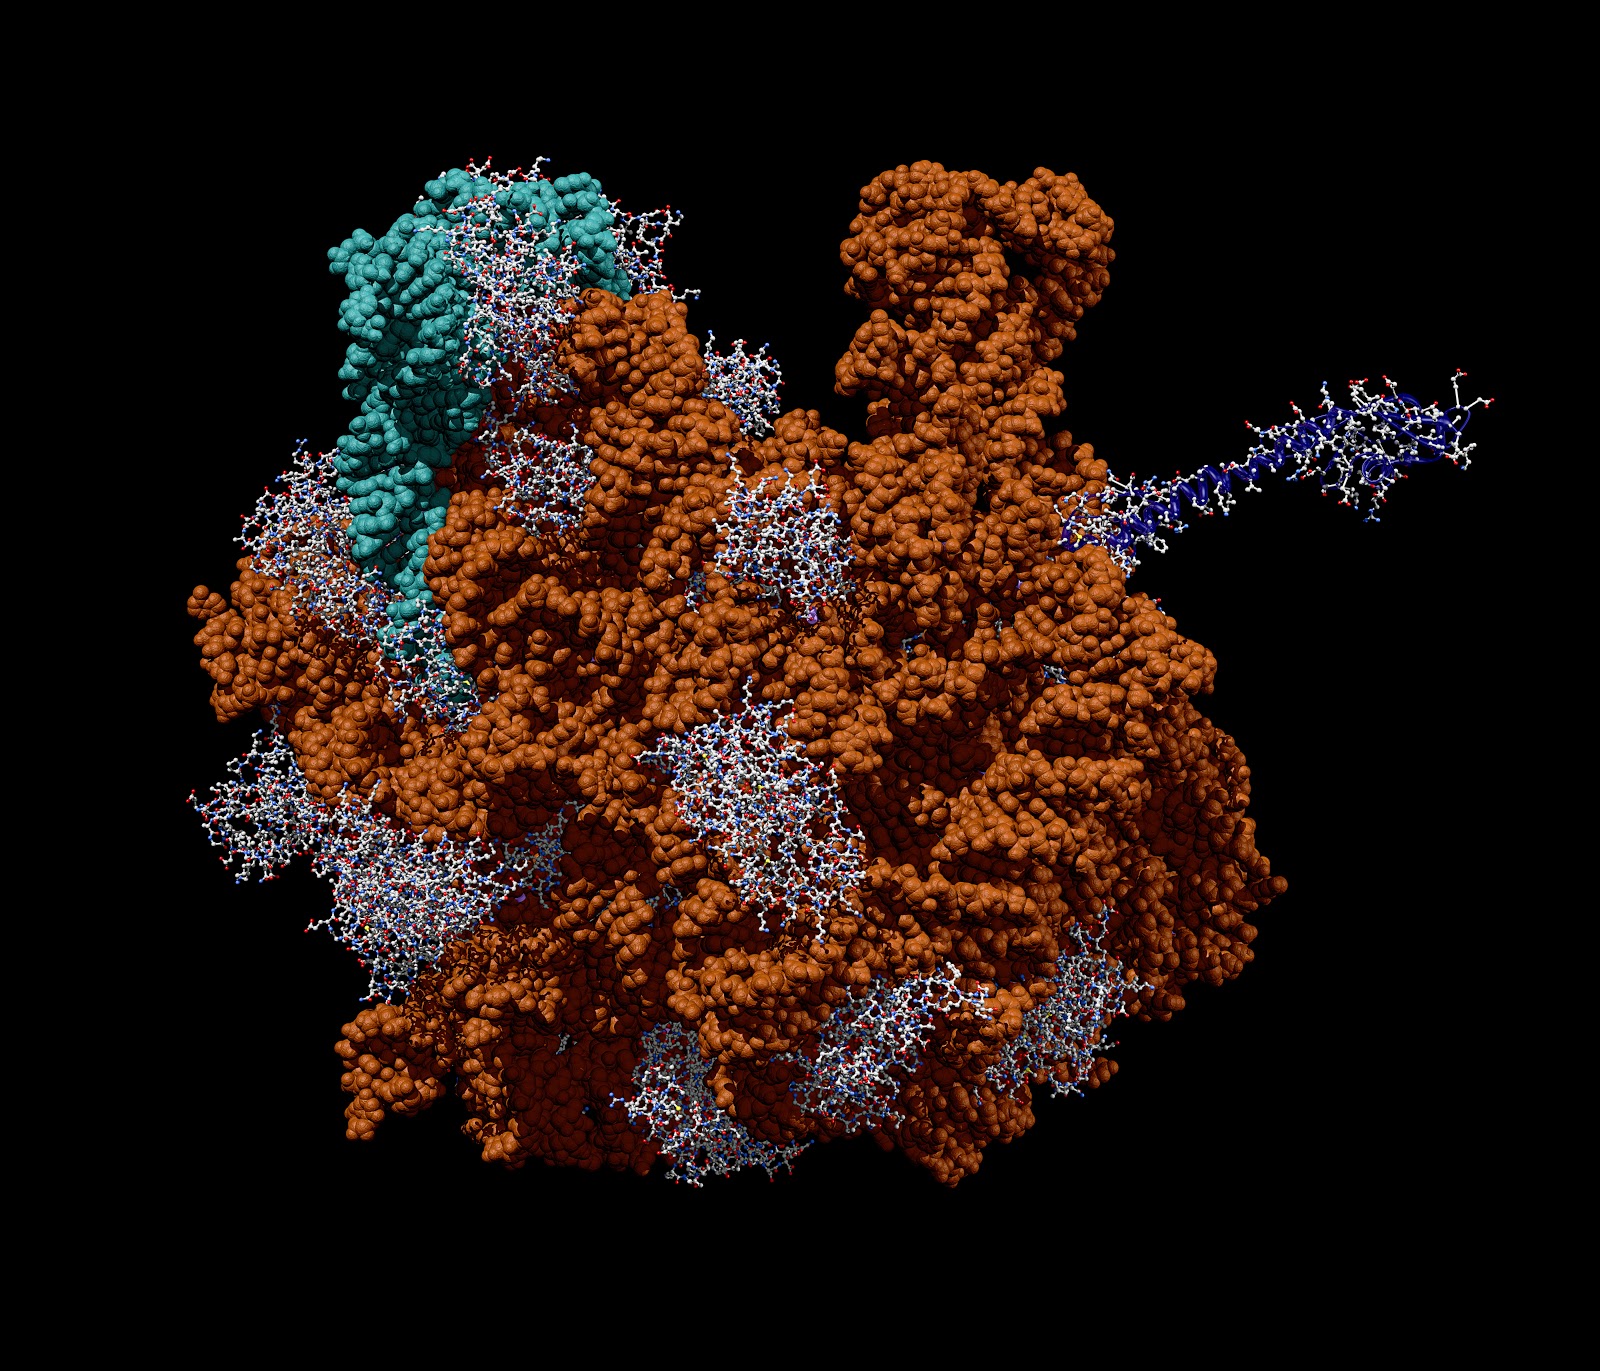 A 3D model of a protein